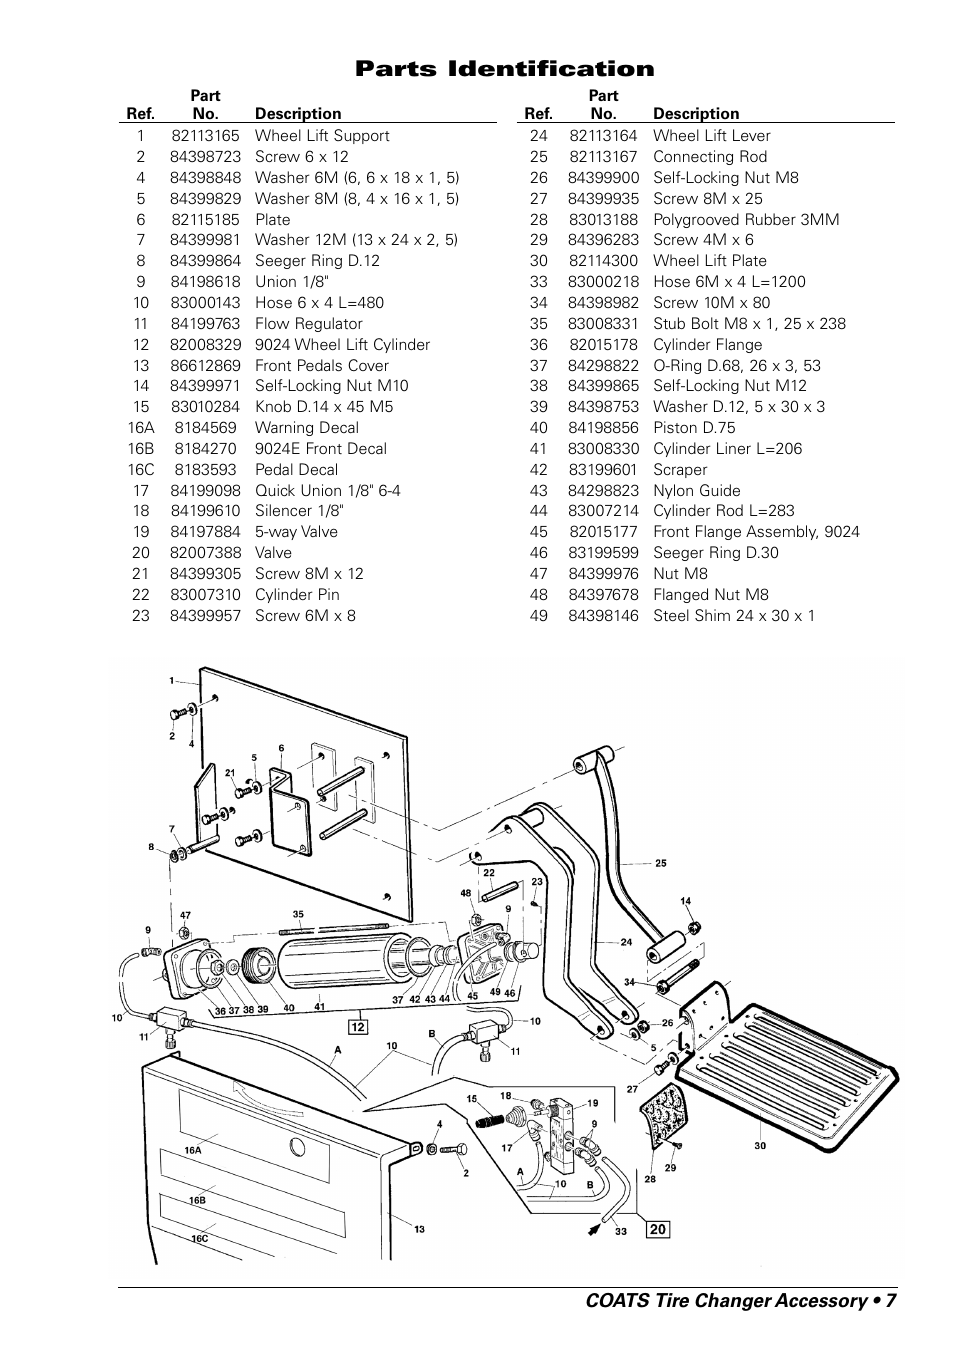 Parts identification | COATS Wheel Lift for use with 9024E Rim Clamp